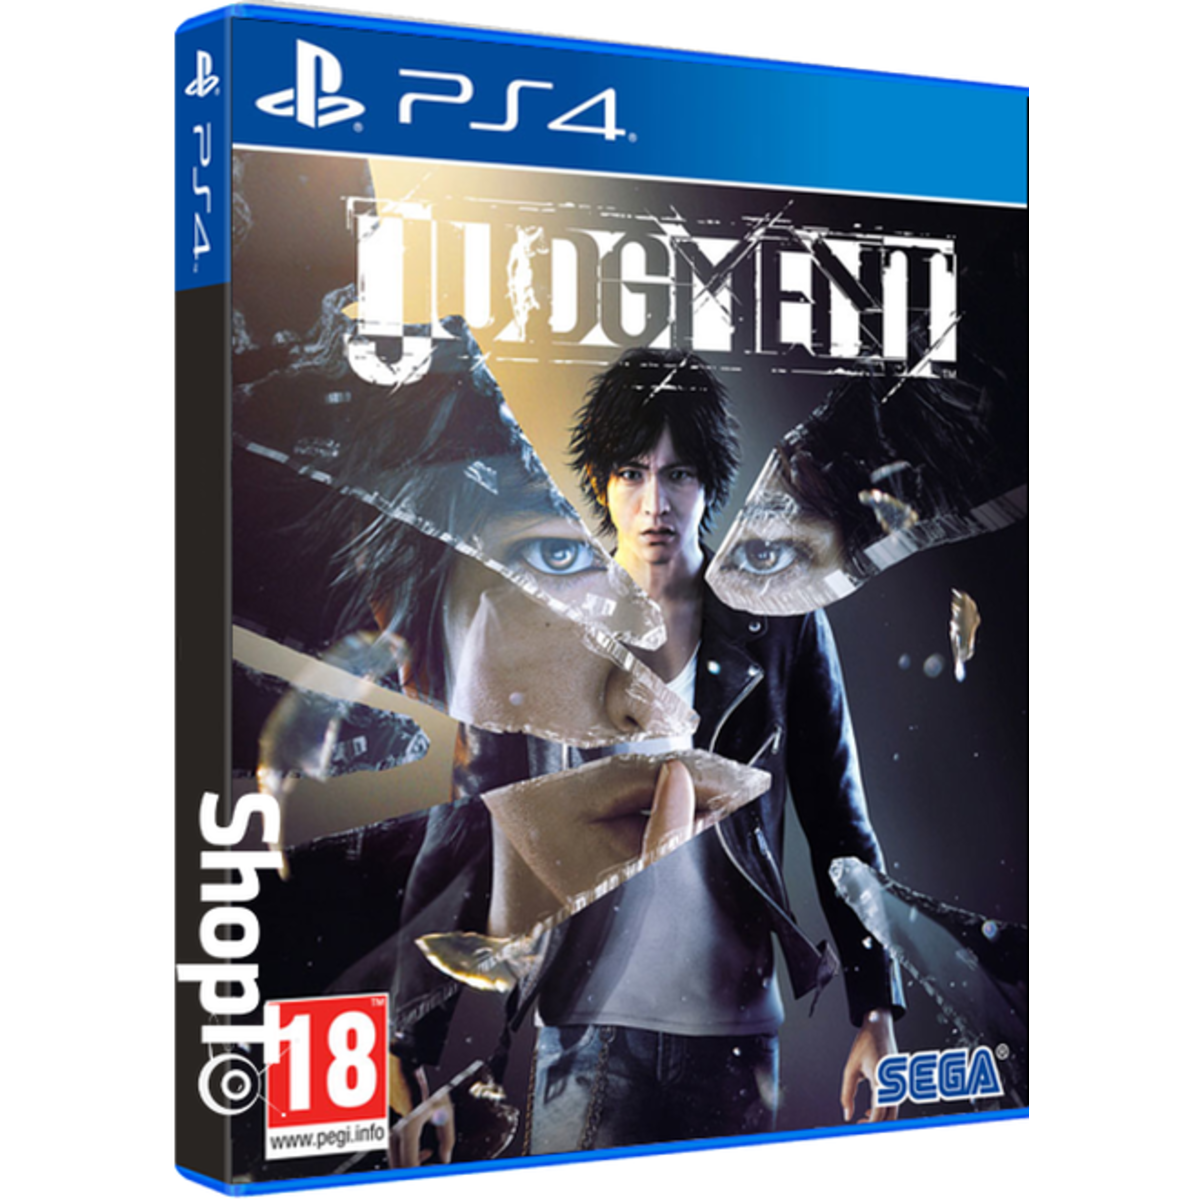 Judgment - PS4 | ShopTo.net